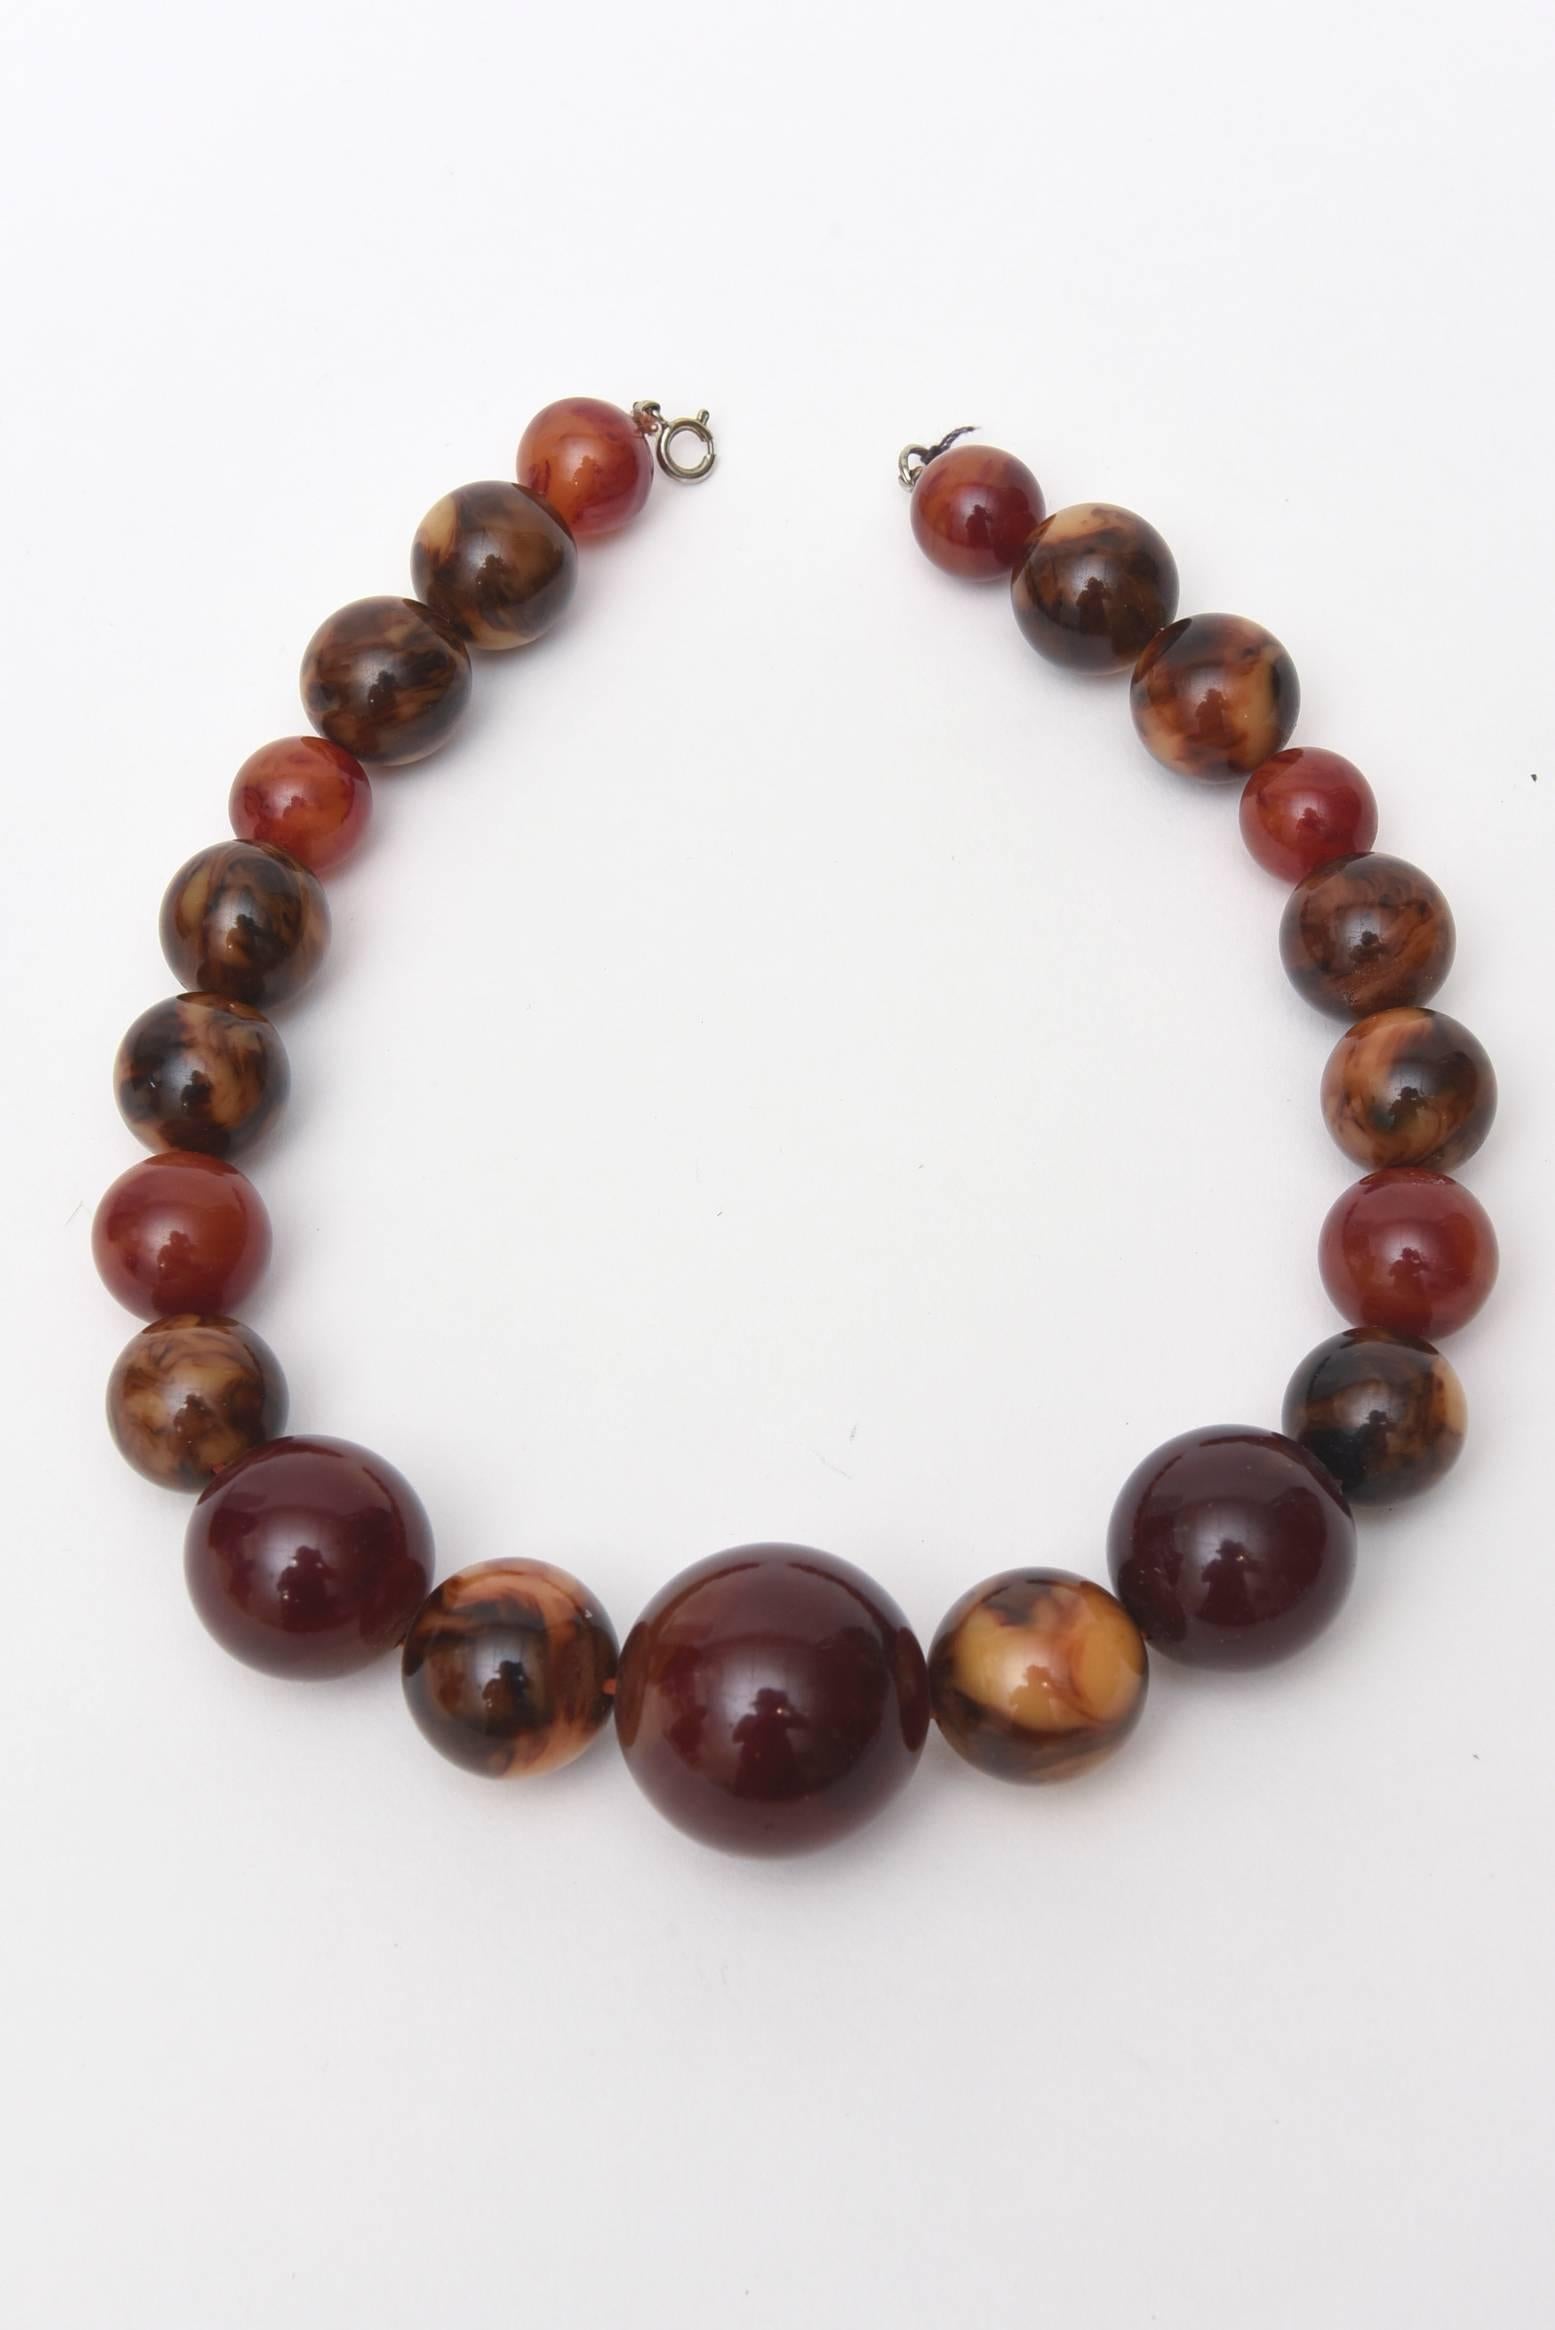 This lovely necklace of graduated Beads of end of the day Bakelite in rich hues of reds, brown and amber are interspersed .
 This collar necklace is a perfect accessory for any fall wardrobe. These are some of the rich colors of fall 2016.
This